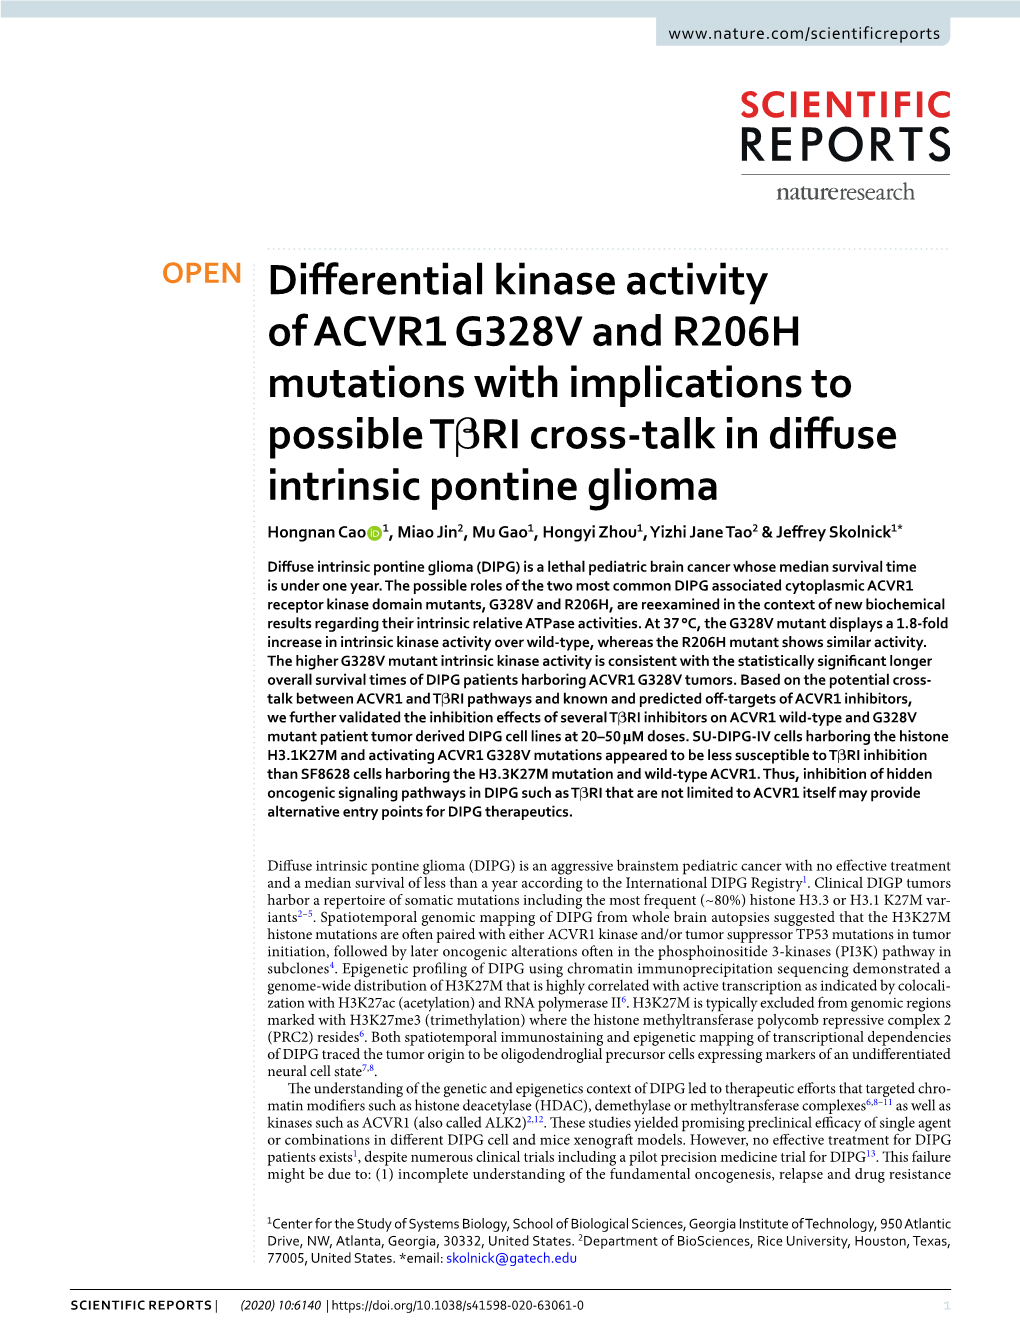 Differential Kinase Activity of ACVR1 G328V and R206H Mutations With